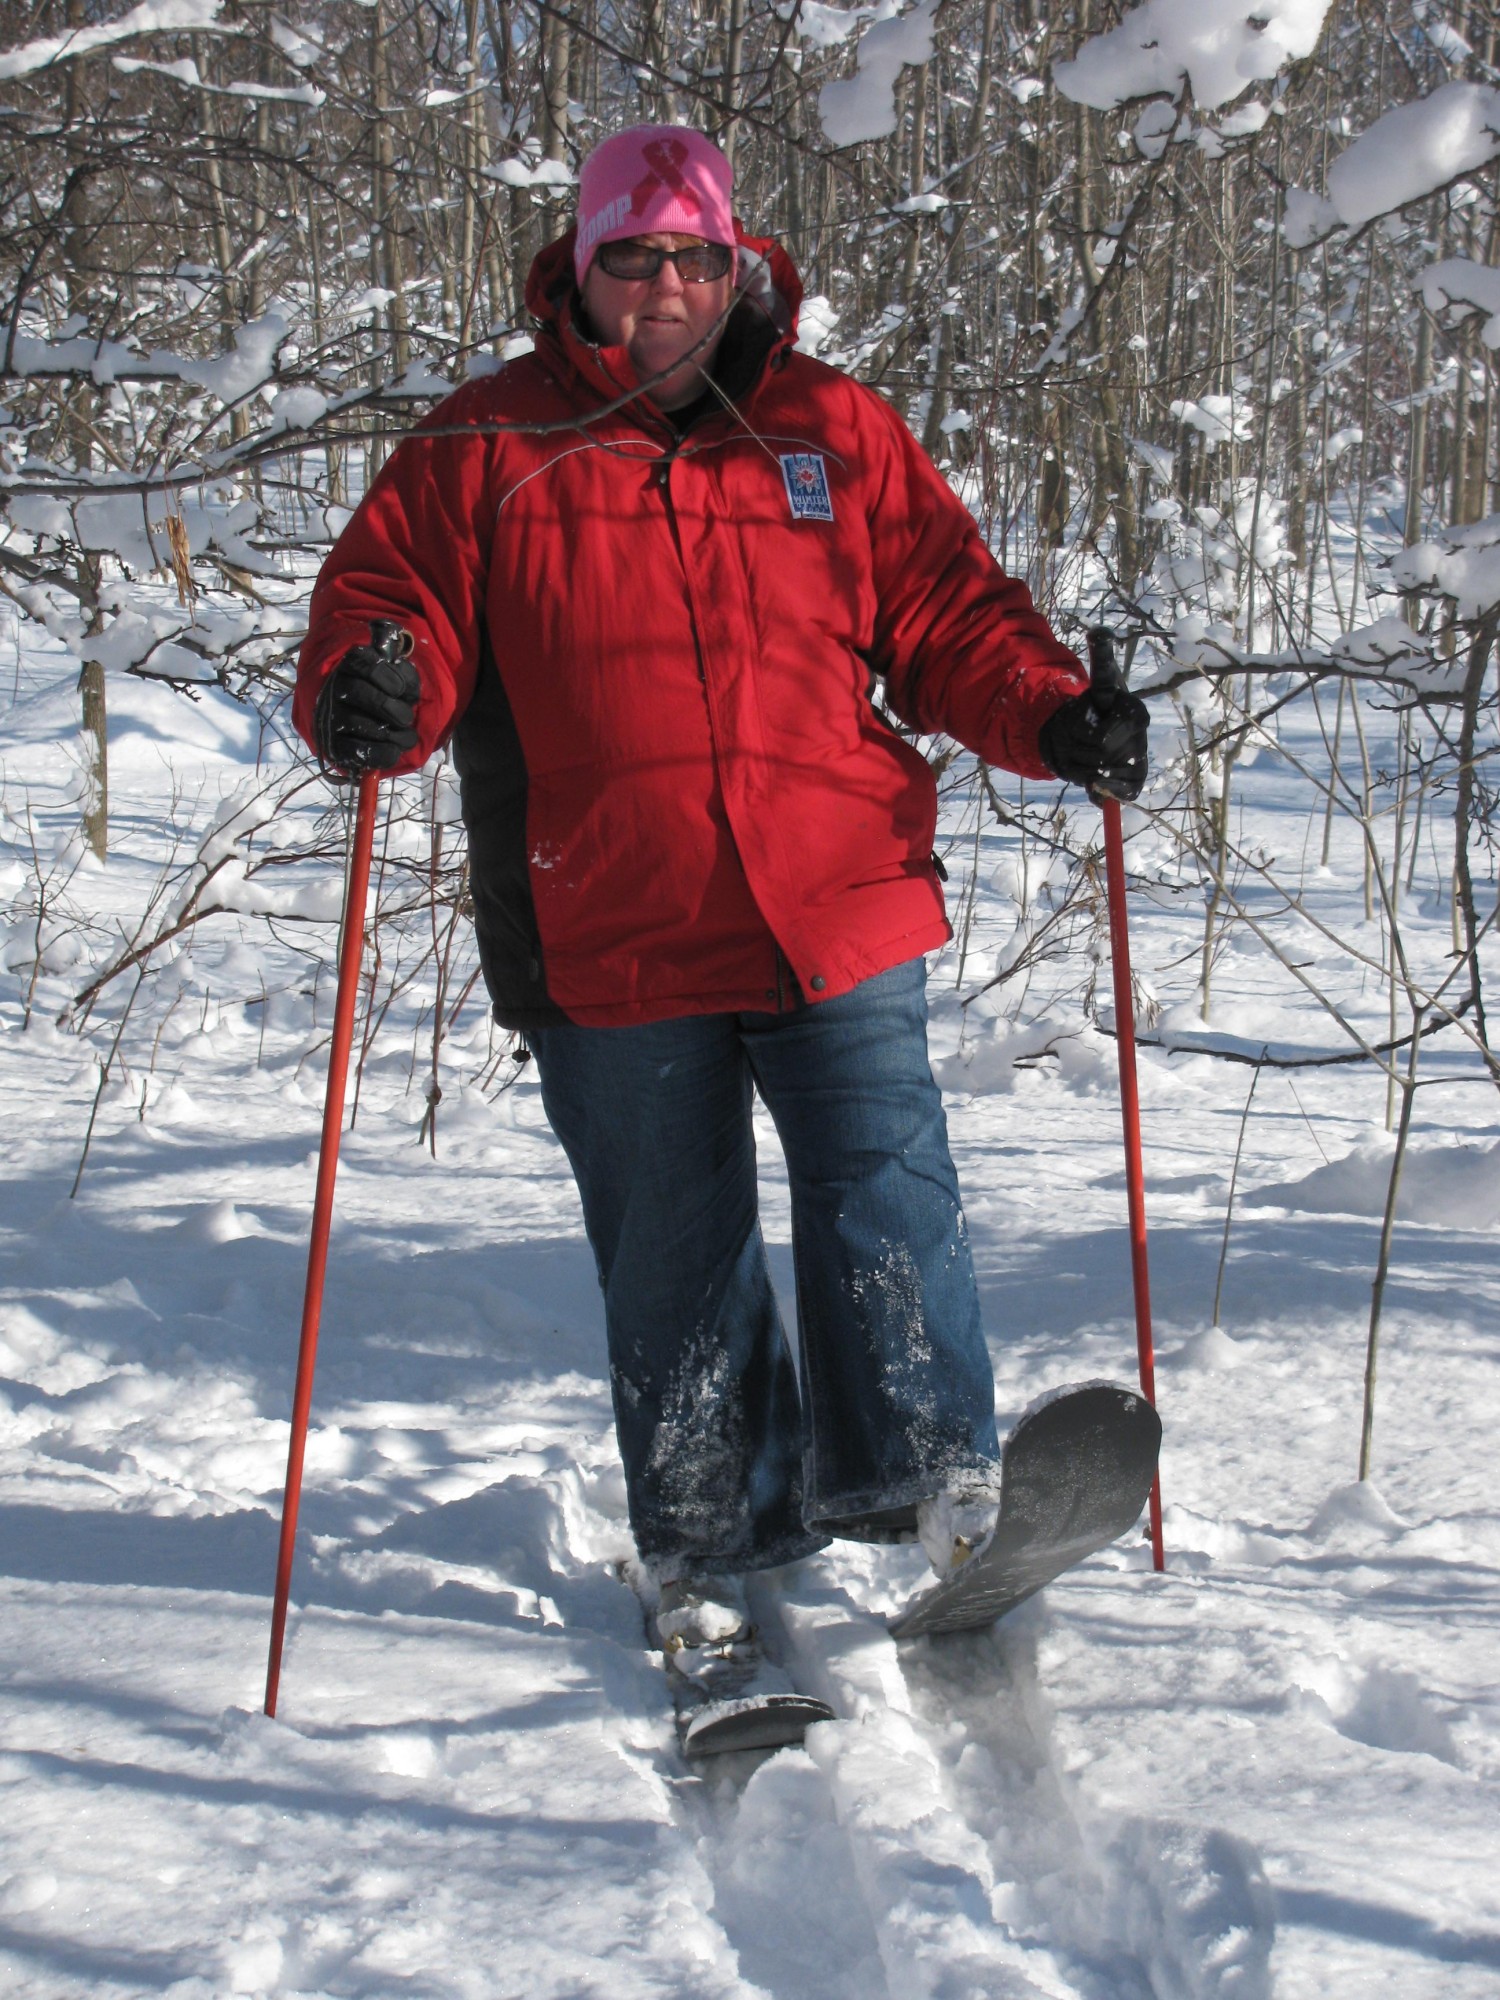 Crossblades split the difference between backcountry skis and snowshoes